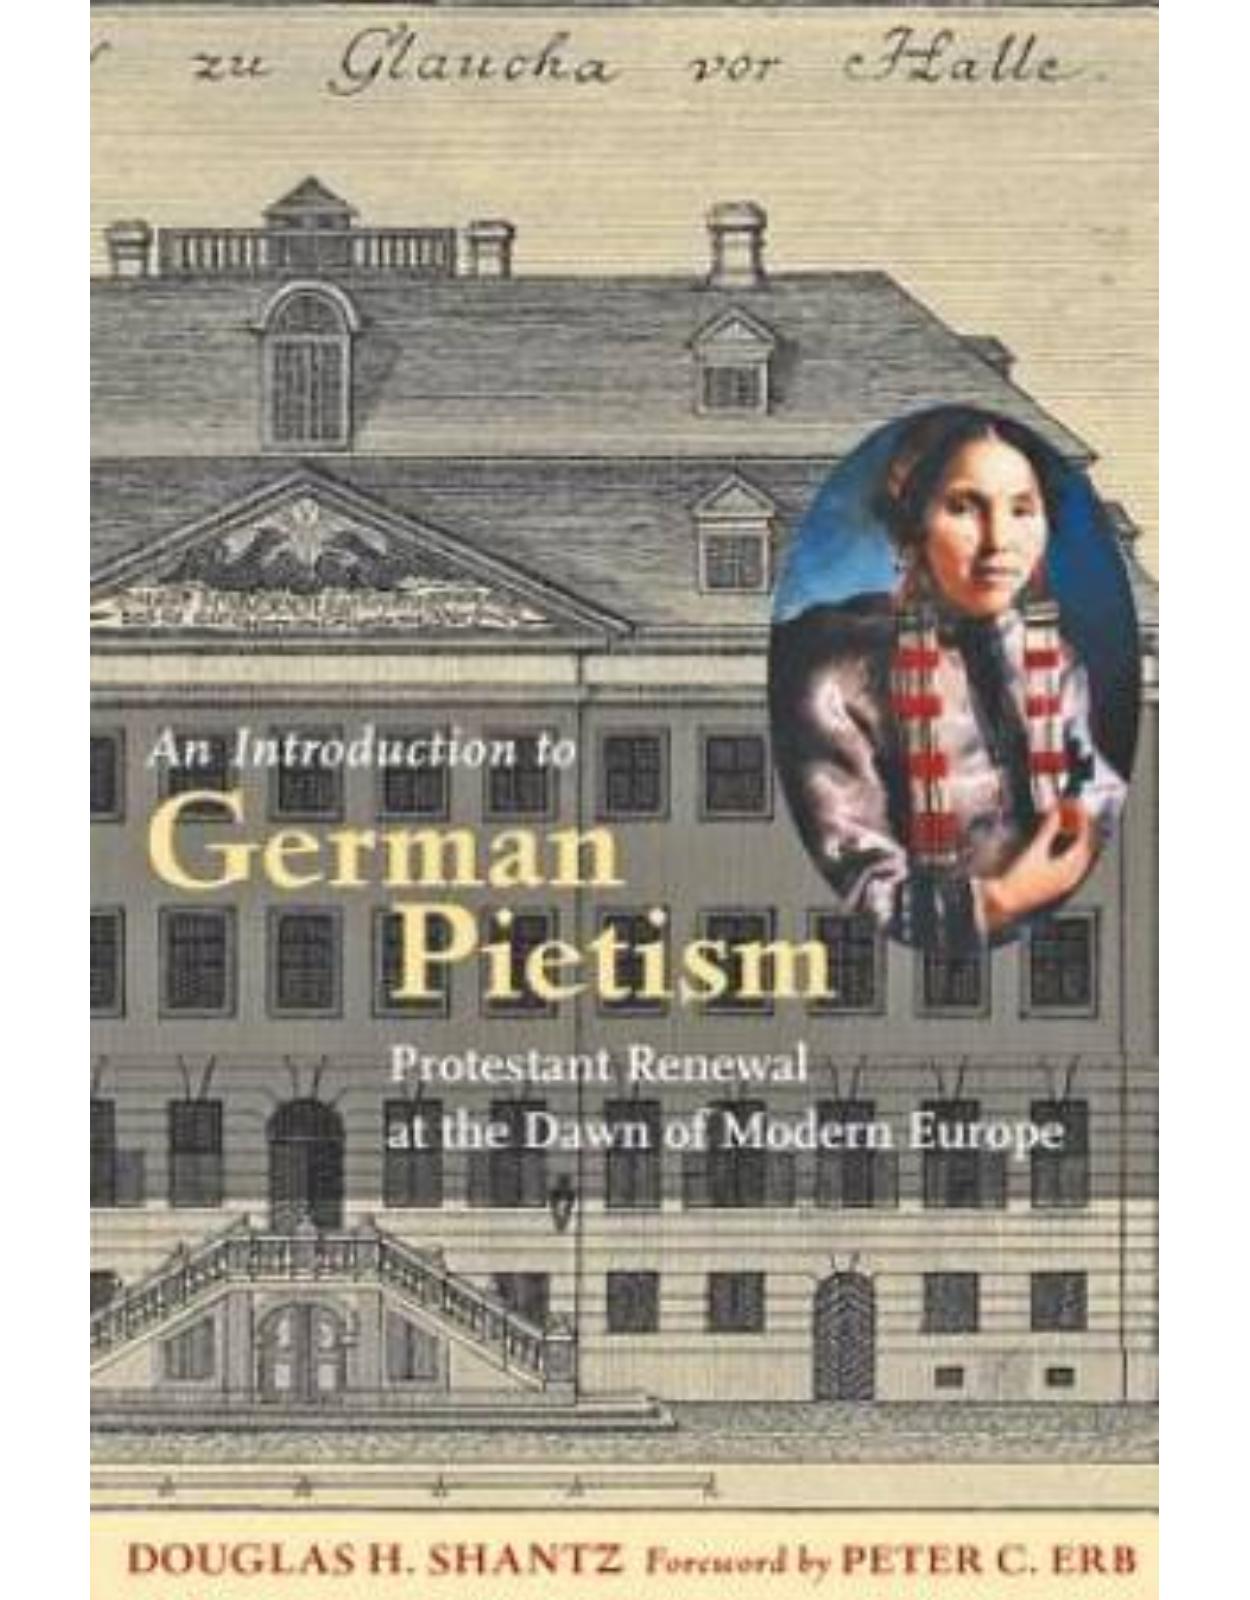 Introduction to German Pietism. Protestant Renewal at the Dawn of Modern Europe